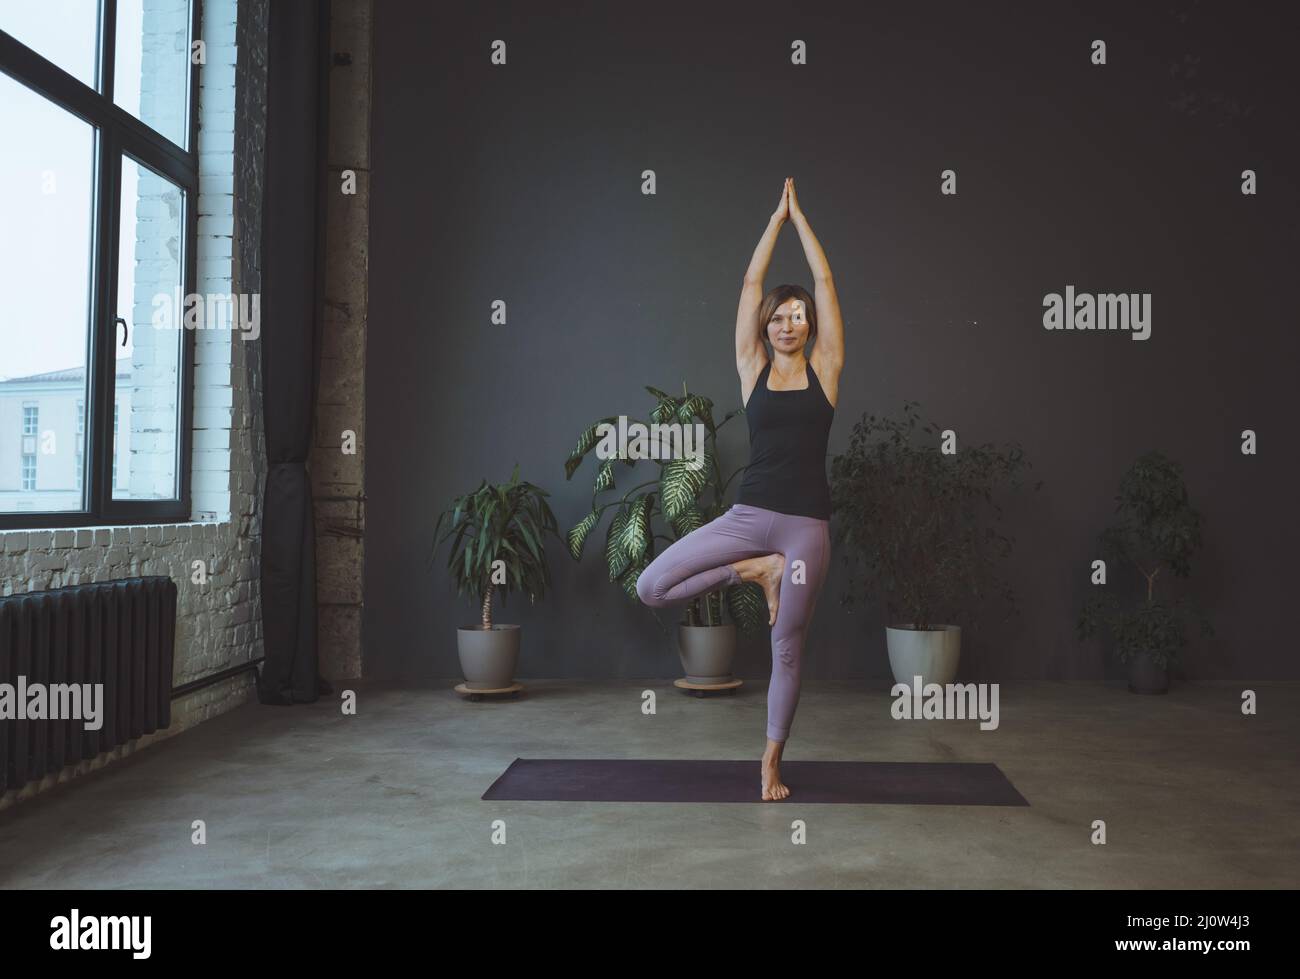 Body conscious. Human body, physical position, well being concept. Yoga, young woman stands in an asana. Stock Photo